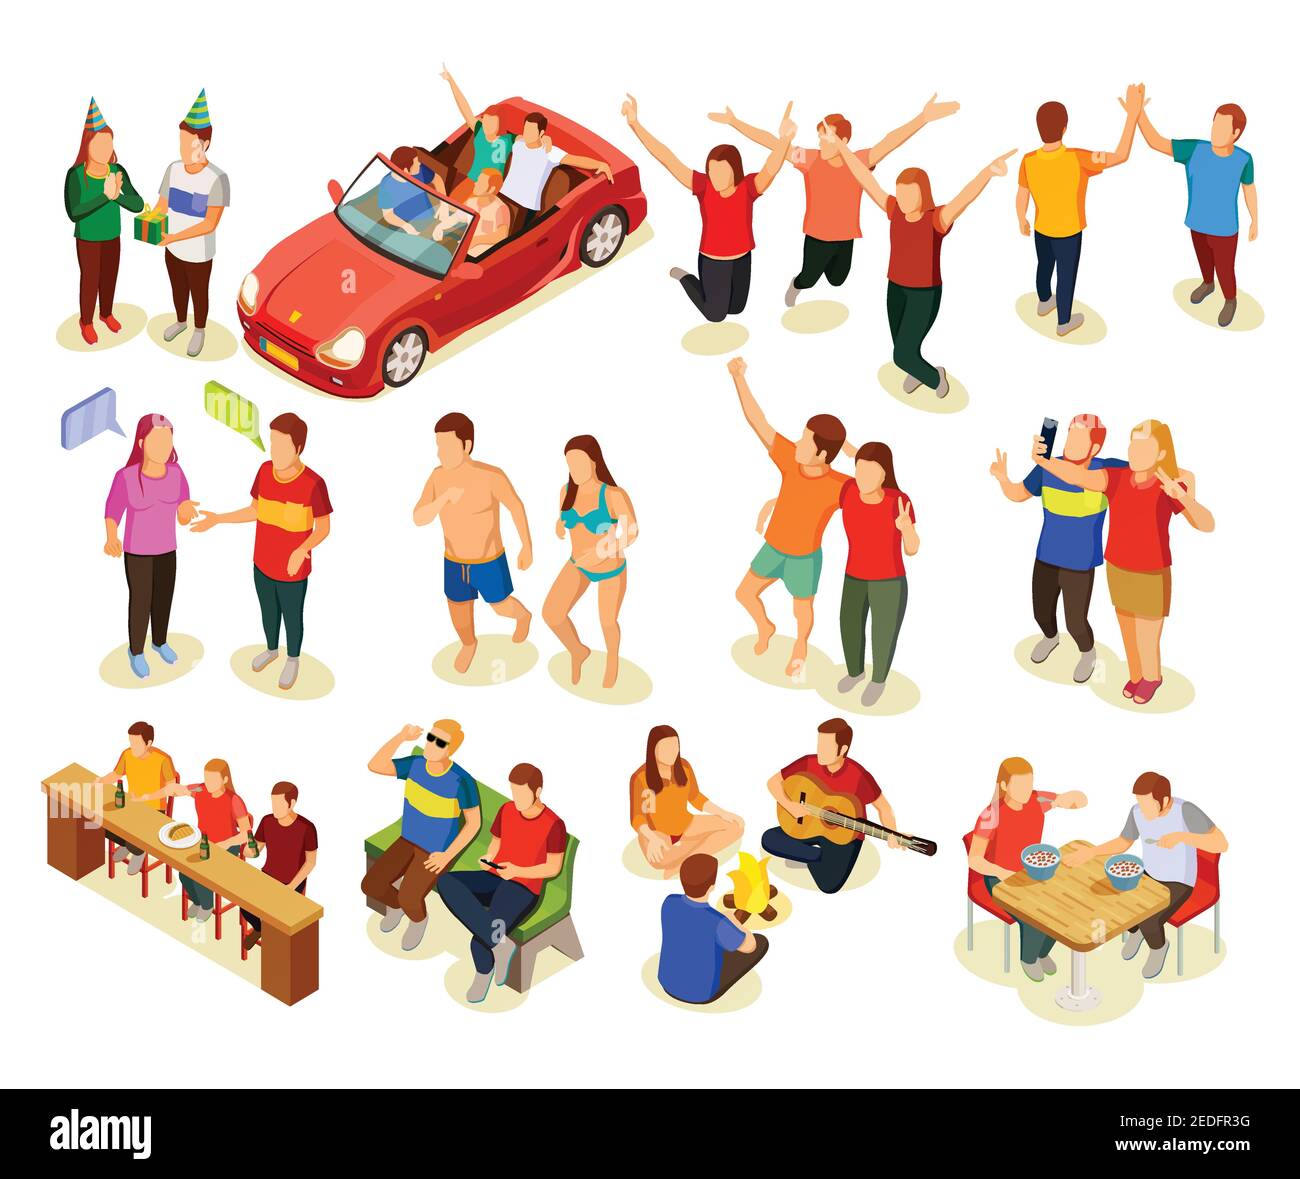 Teenagers friends having fun together isometric icons set isolated on white background vector illustration Stock Vector